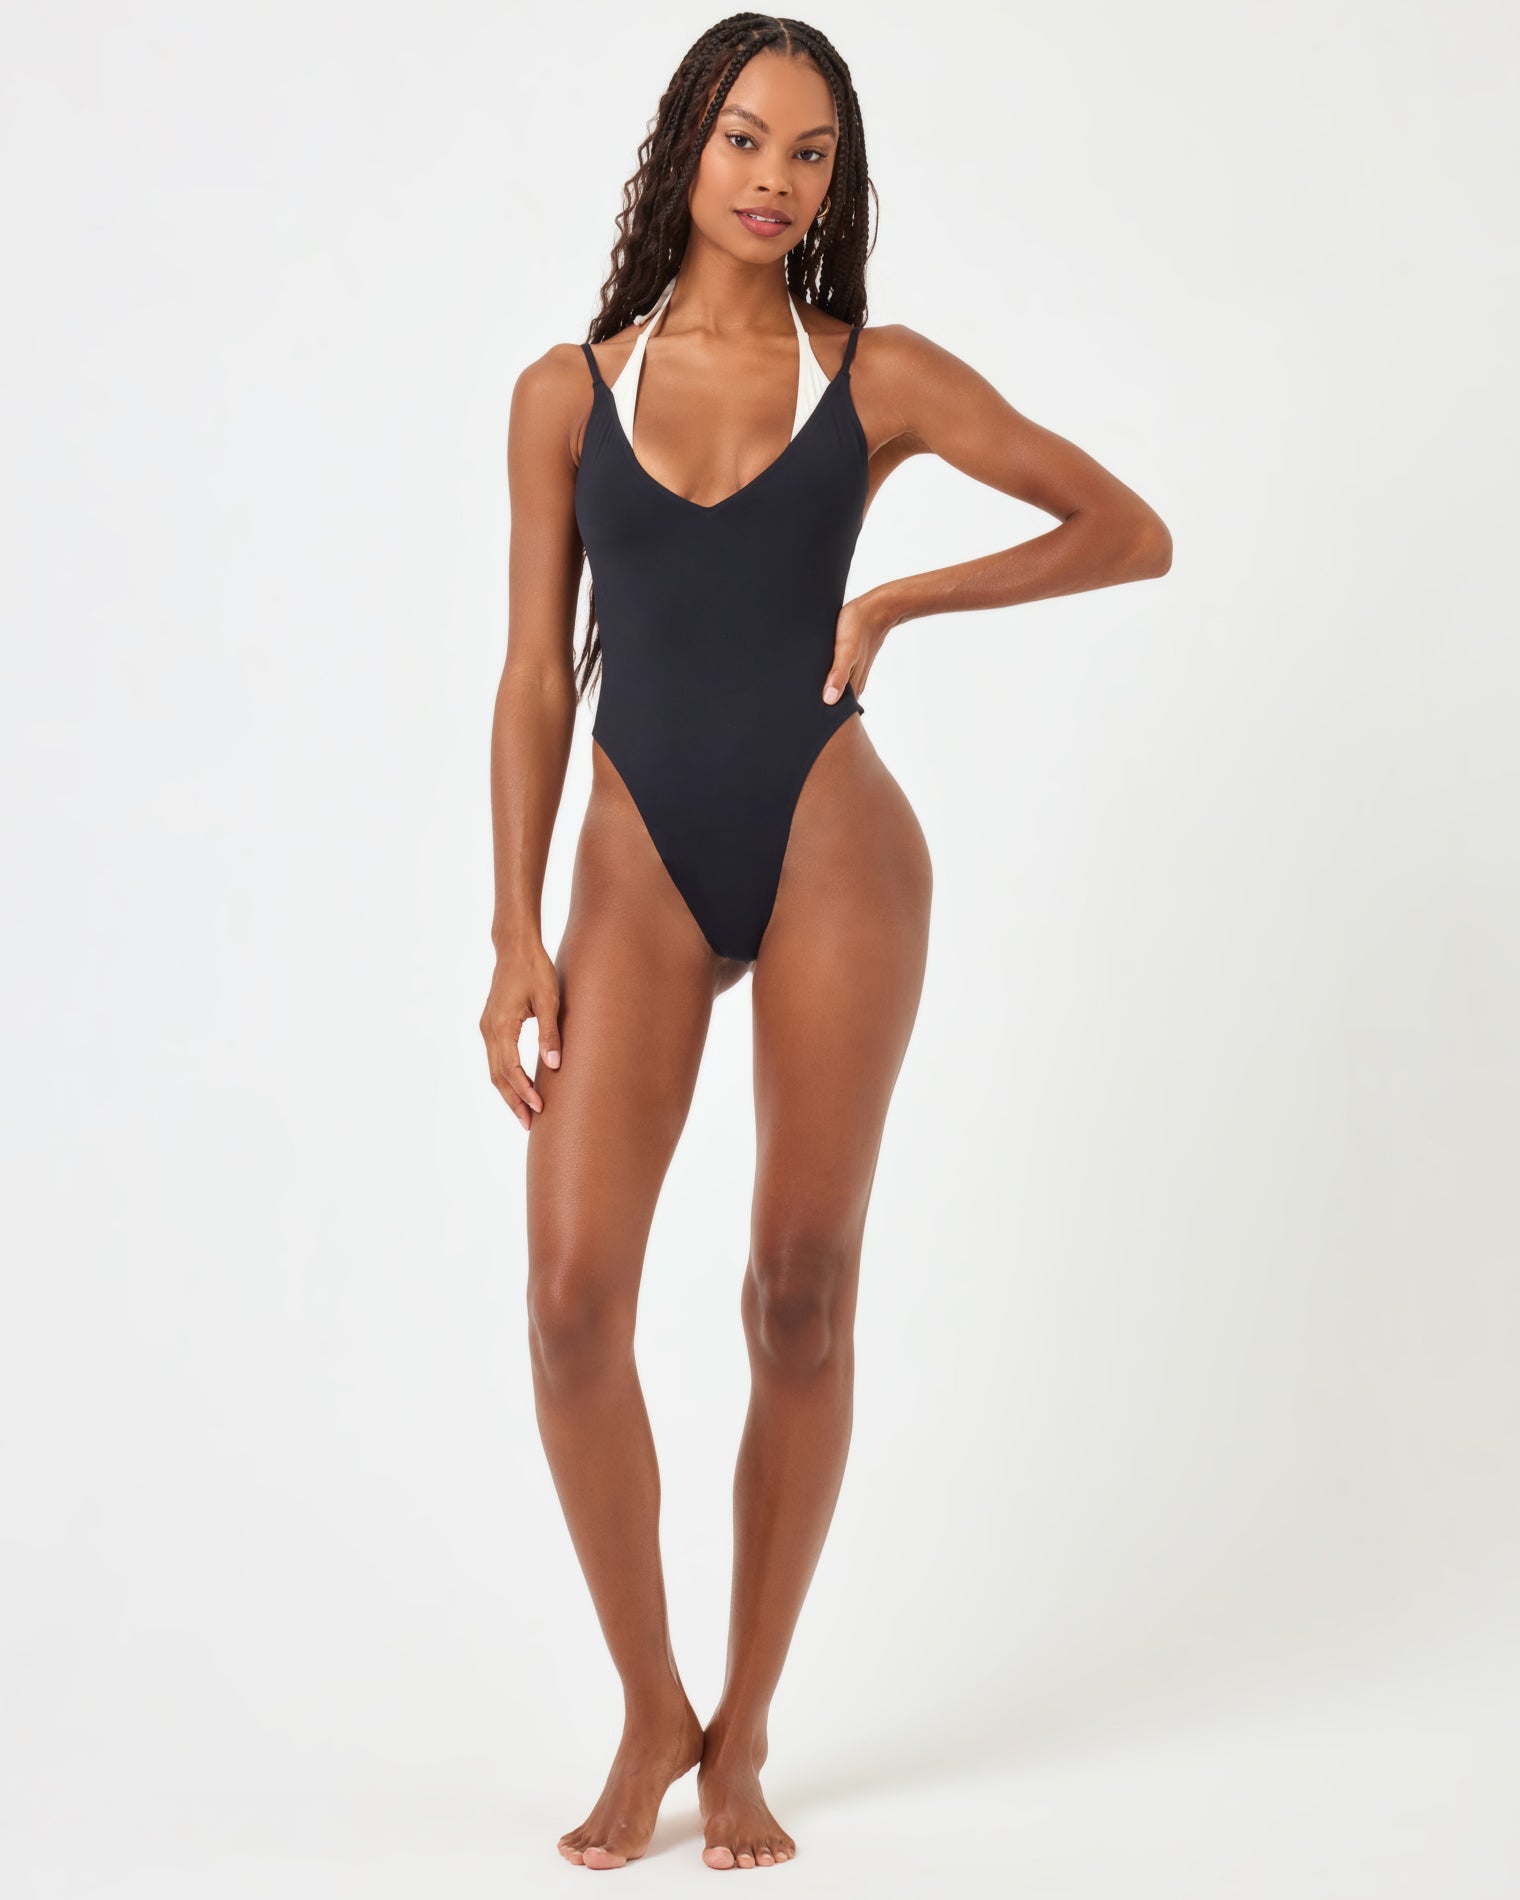 Product  L*Space Pointelle Rib Gianna One Piece Swimsuit